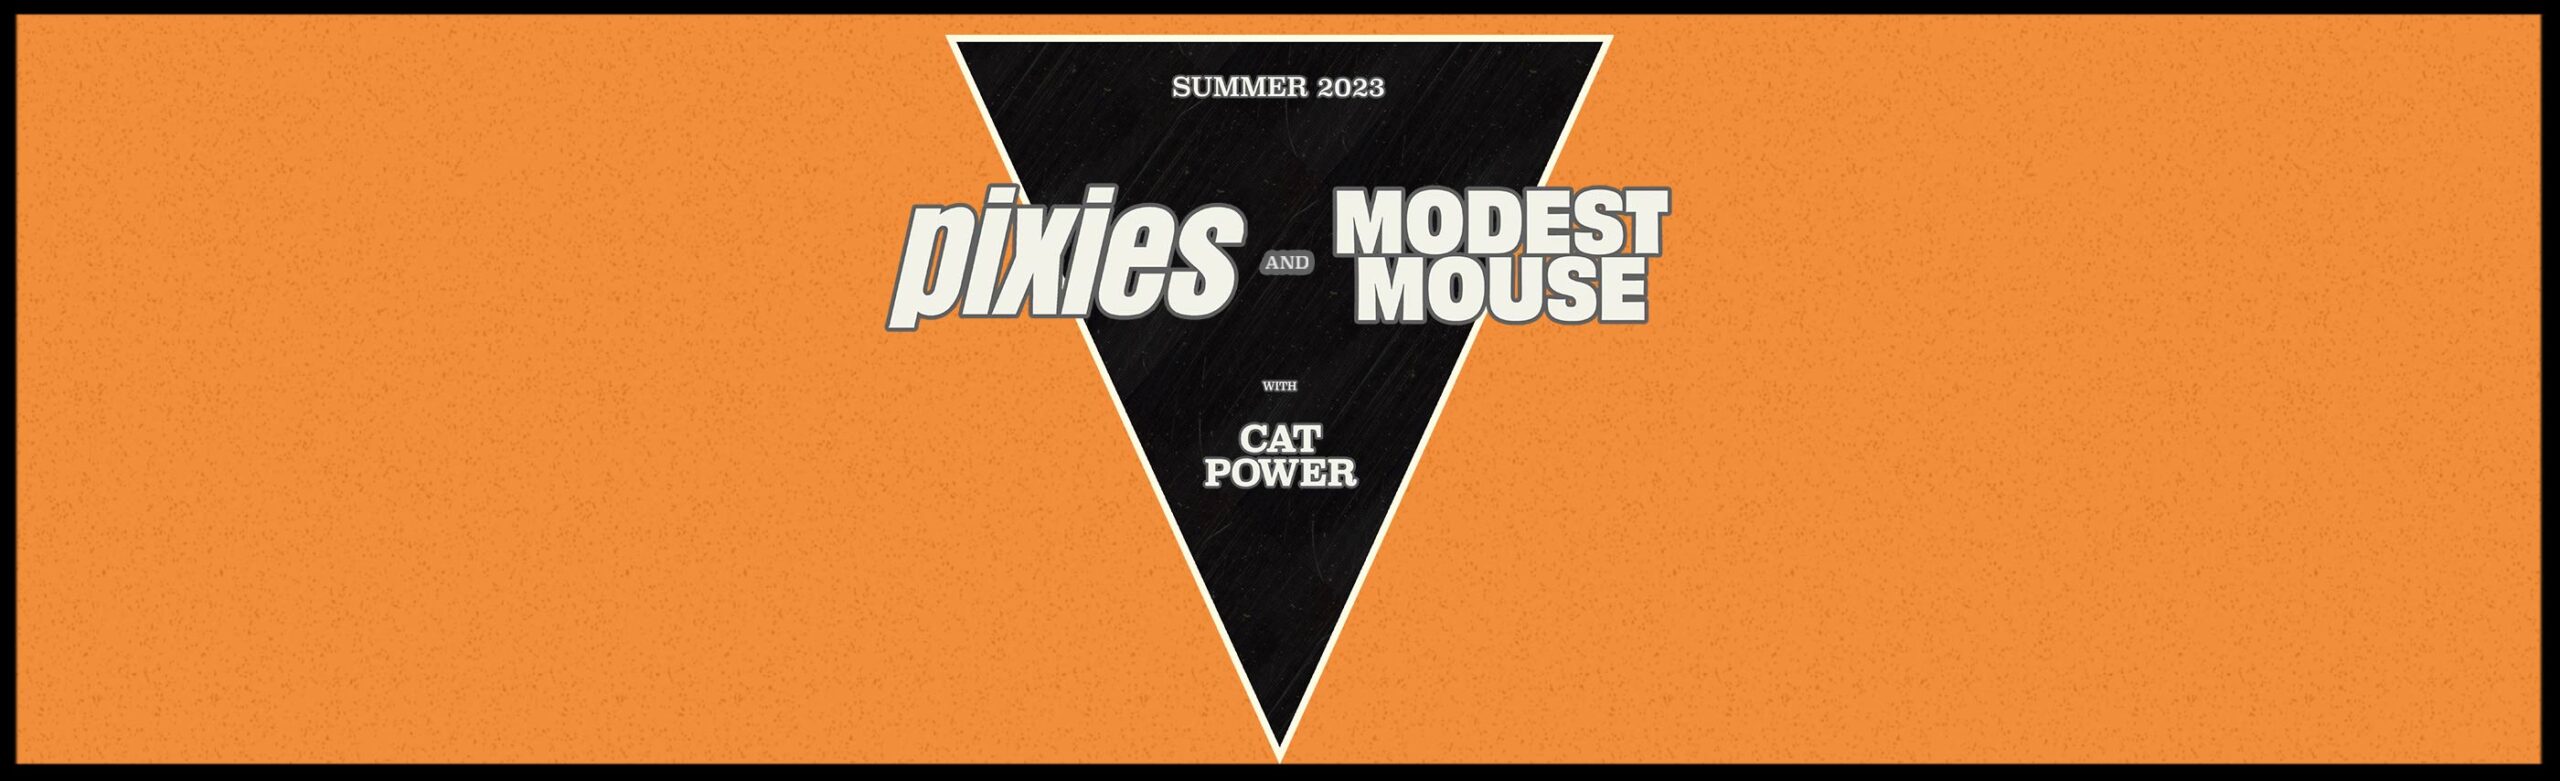 Pixies and Modest Mouse - Logjam Presents